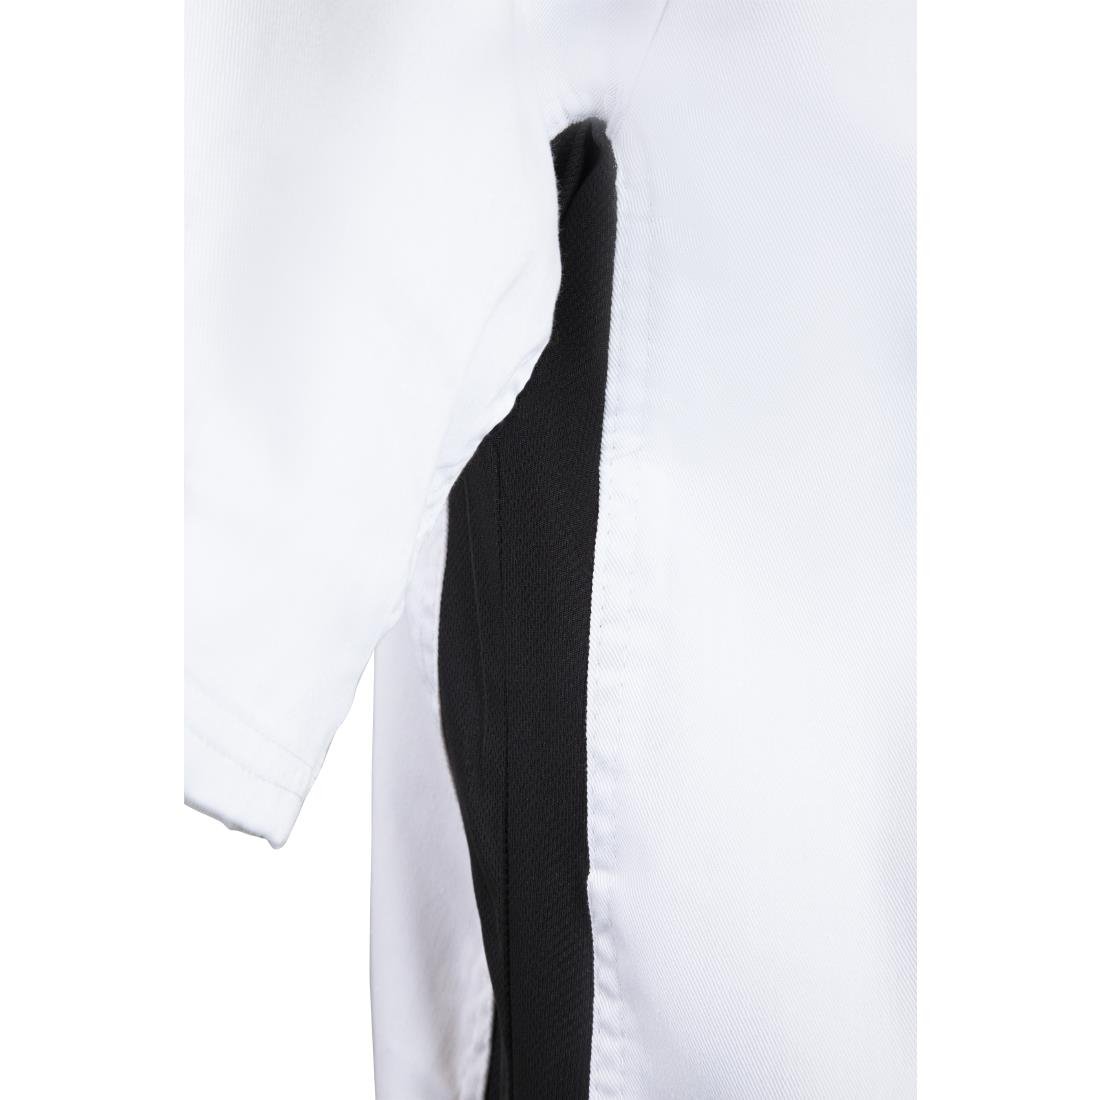 A928-XS Whites Nevada Unisex Chefs Jacket Short Sleeve Black and White XS JD Catering Equipment Solutions Ltd